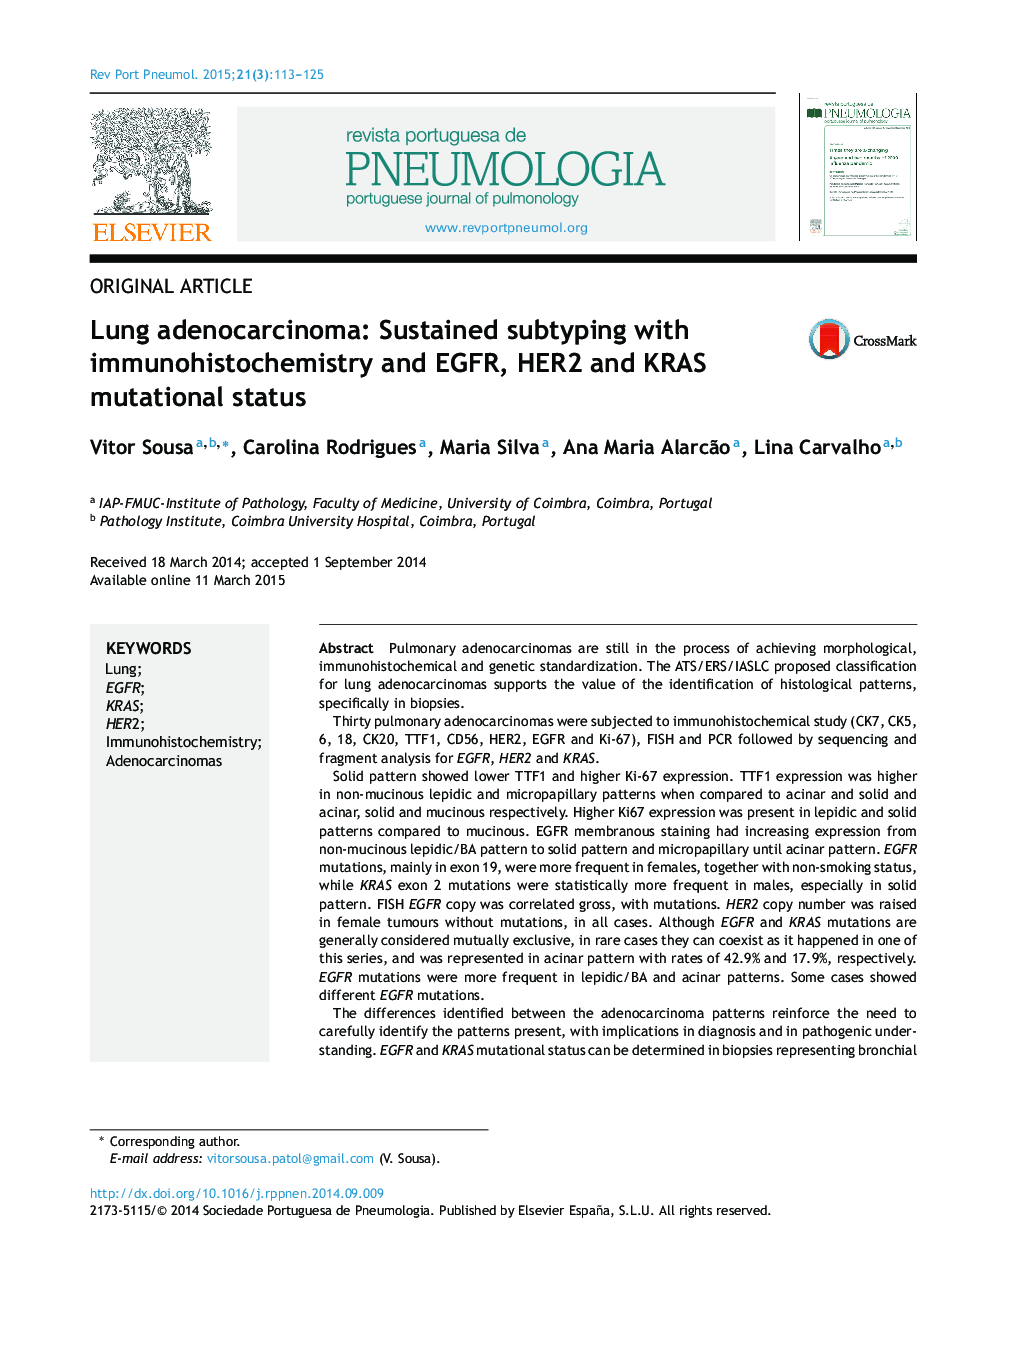 Lung adenocarcinoma: Sustained subtyping with immunohistochemistry and EGFR, HER2 and KRAS mutational status